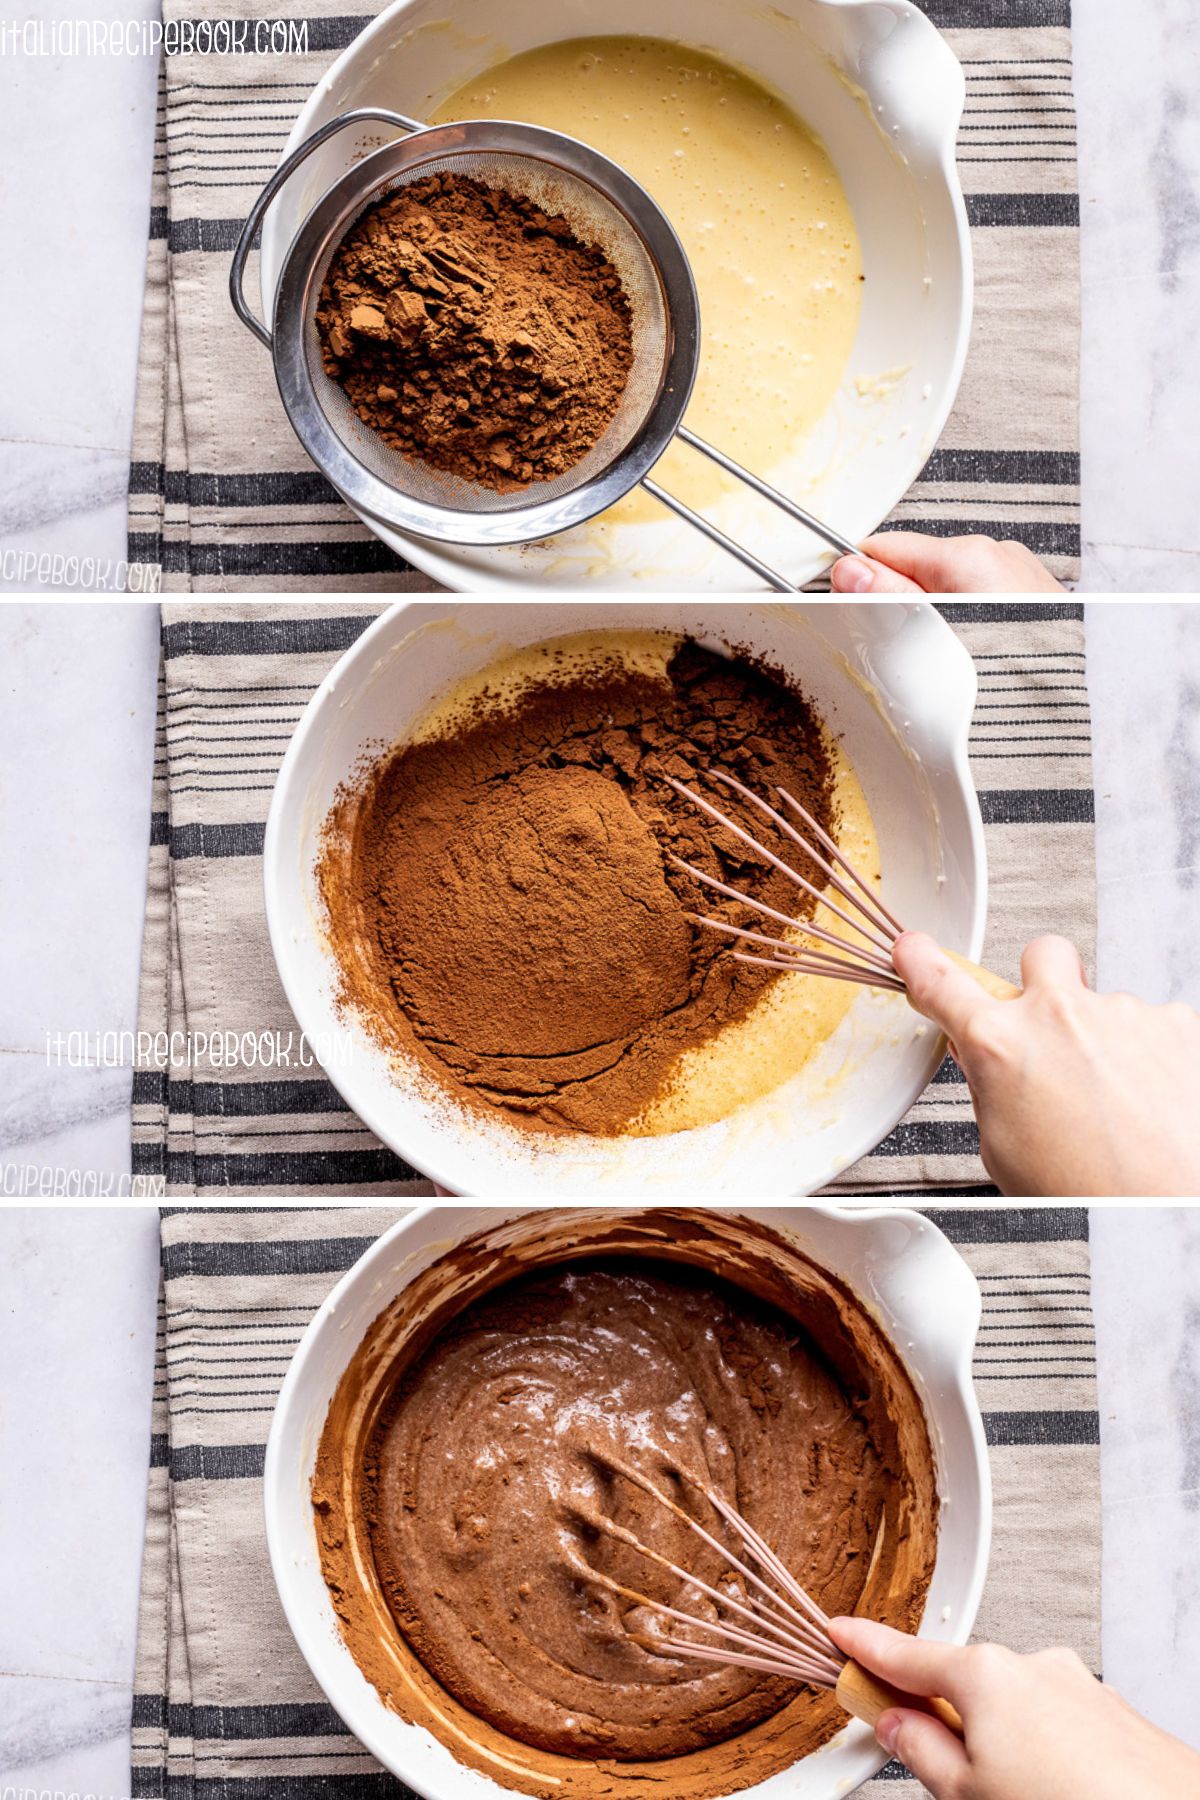 chocolate ricotta cake batter - add sifted cocoa powder